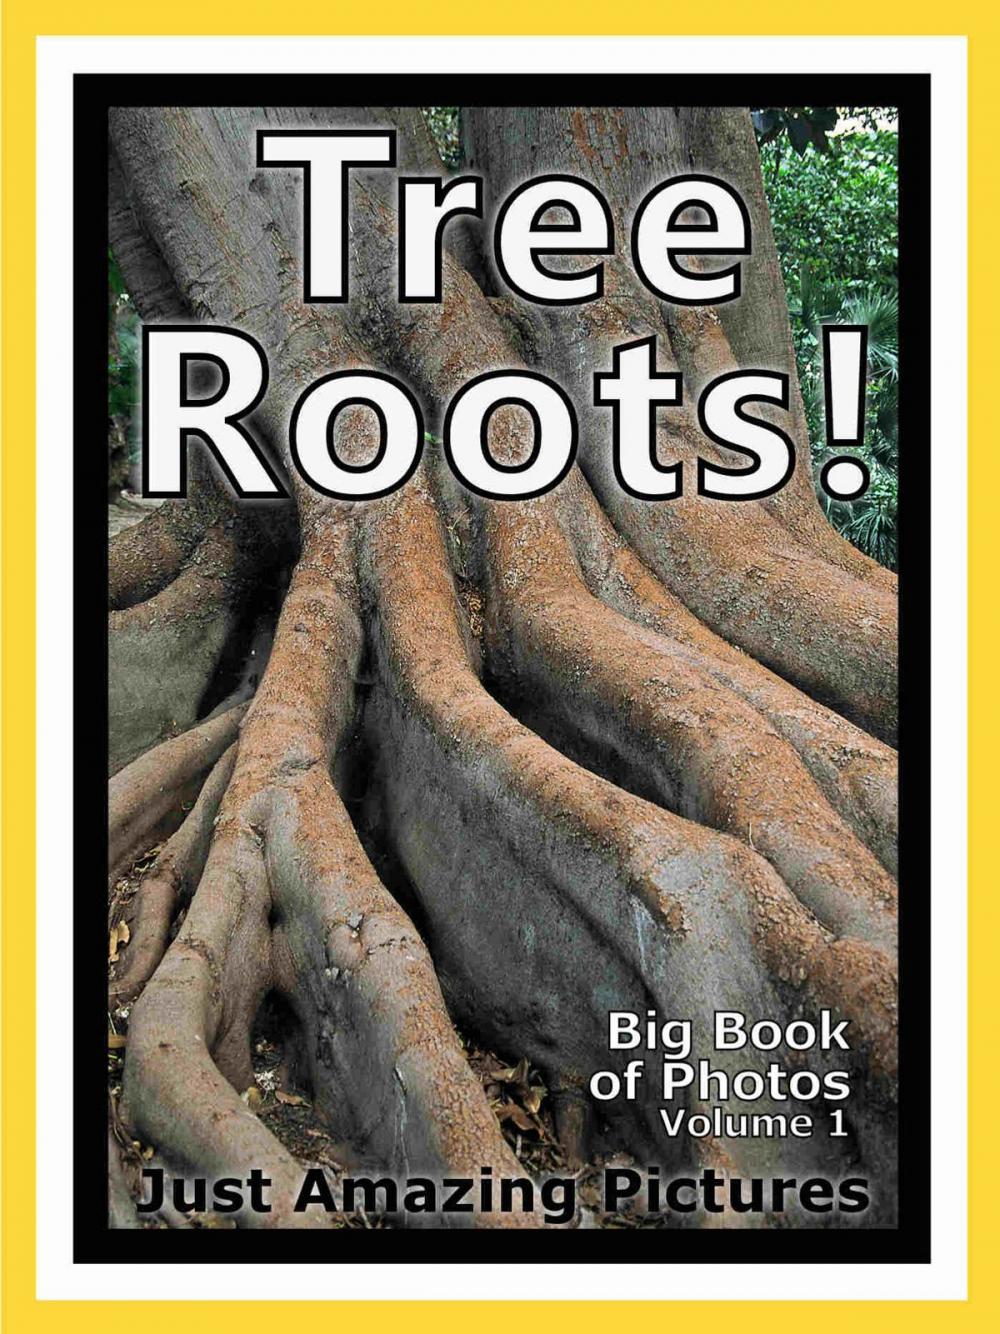 Big bigCover of Just Tree Root Photos! Big Book of Photographs & Pictures of Tree Roots, Vol. 1